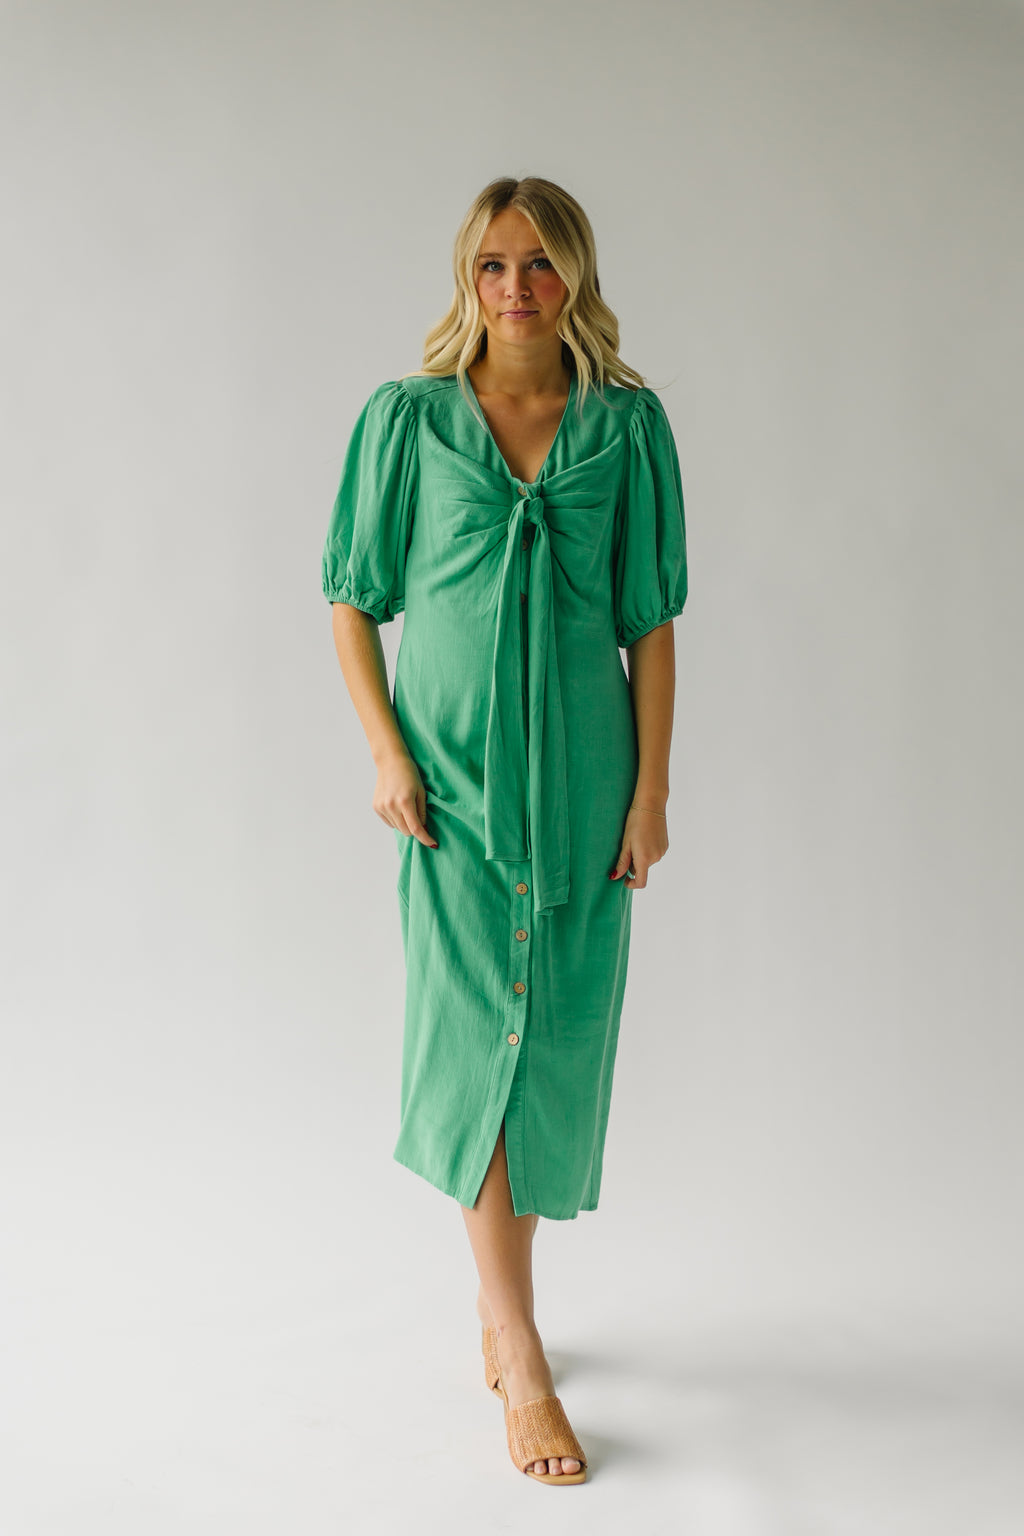 Womens Ratched Style Green Nurse Costume [D12546] - Struts Party Superstore